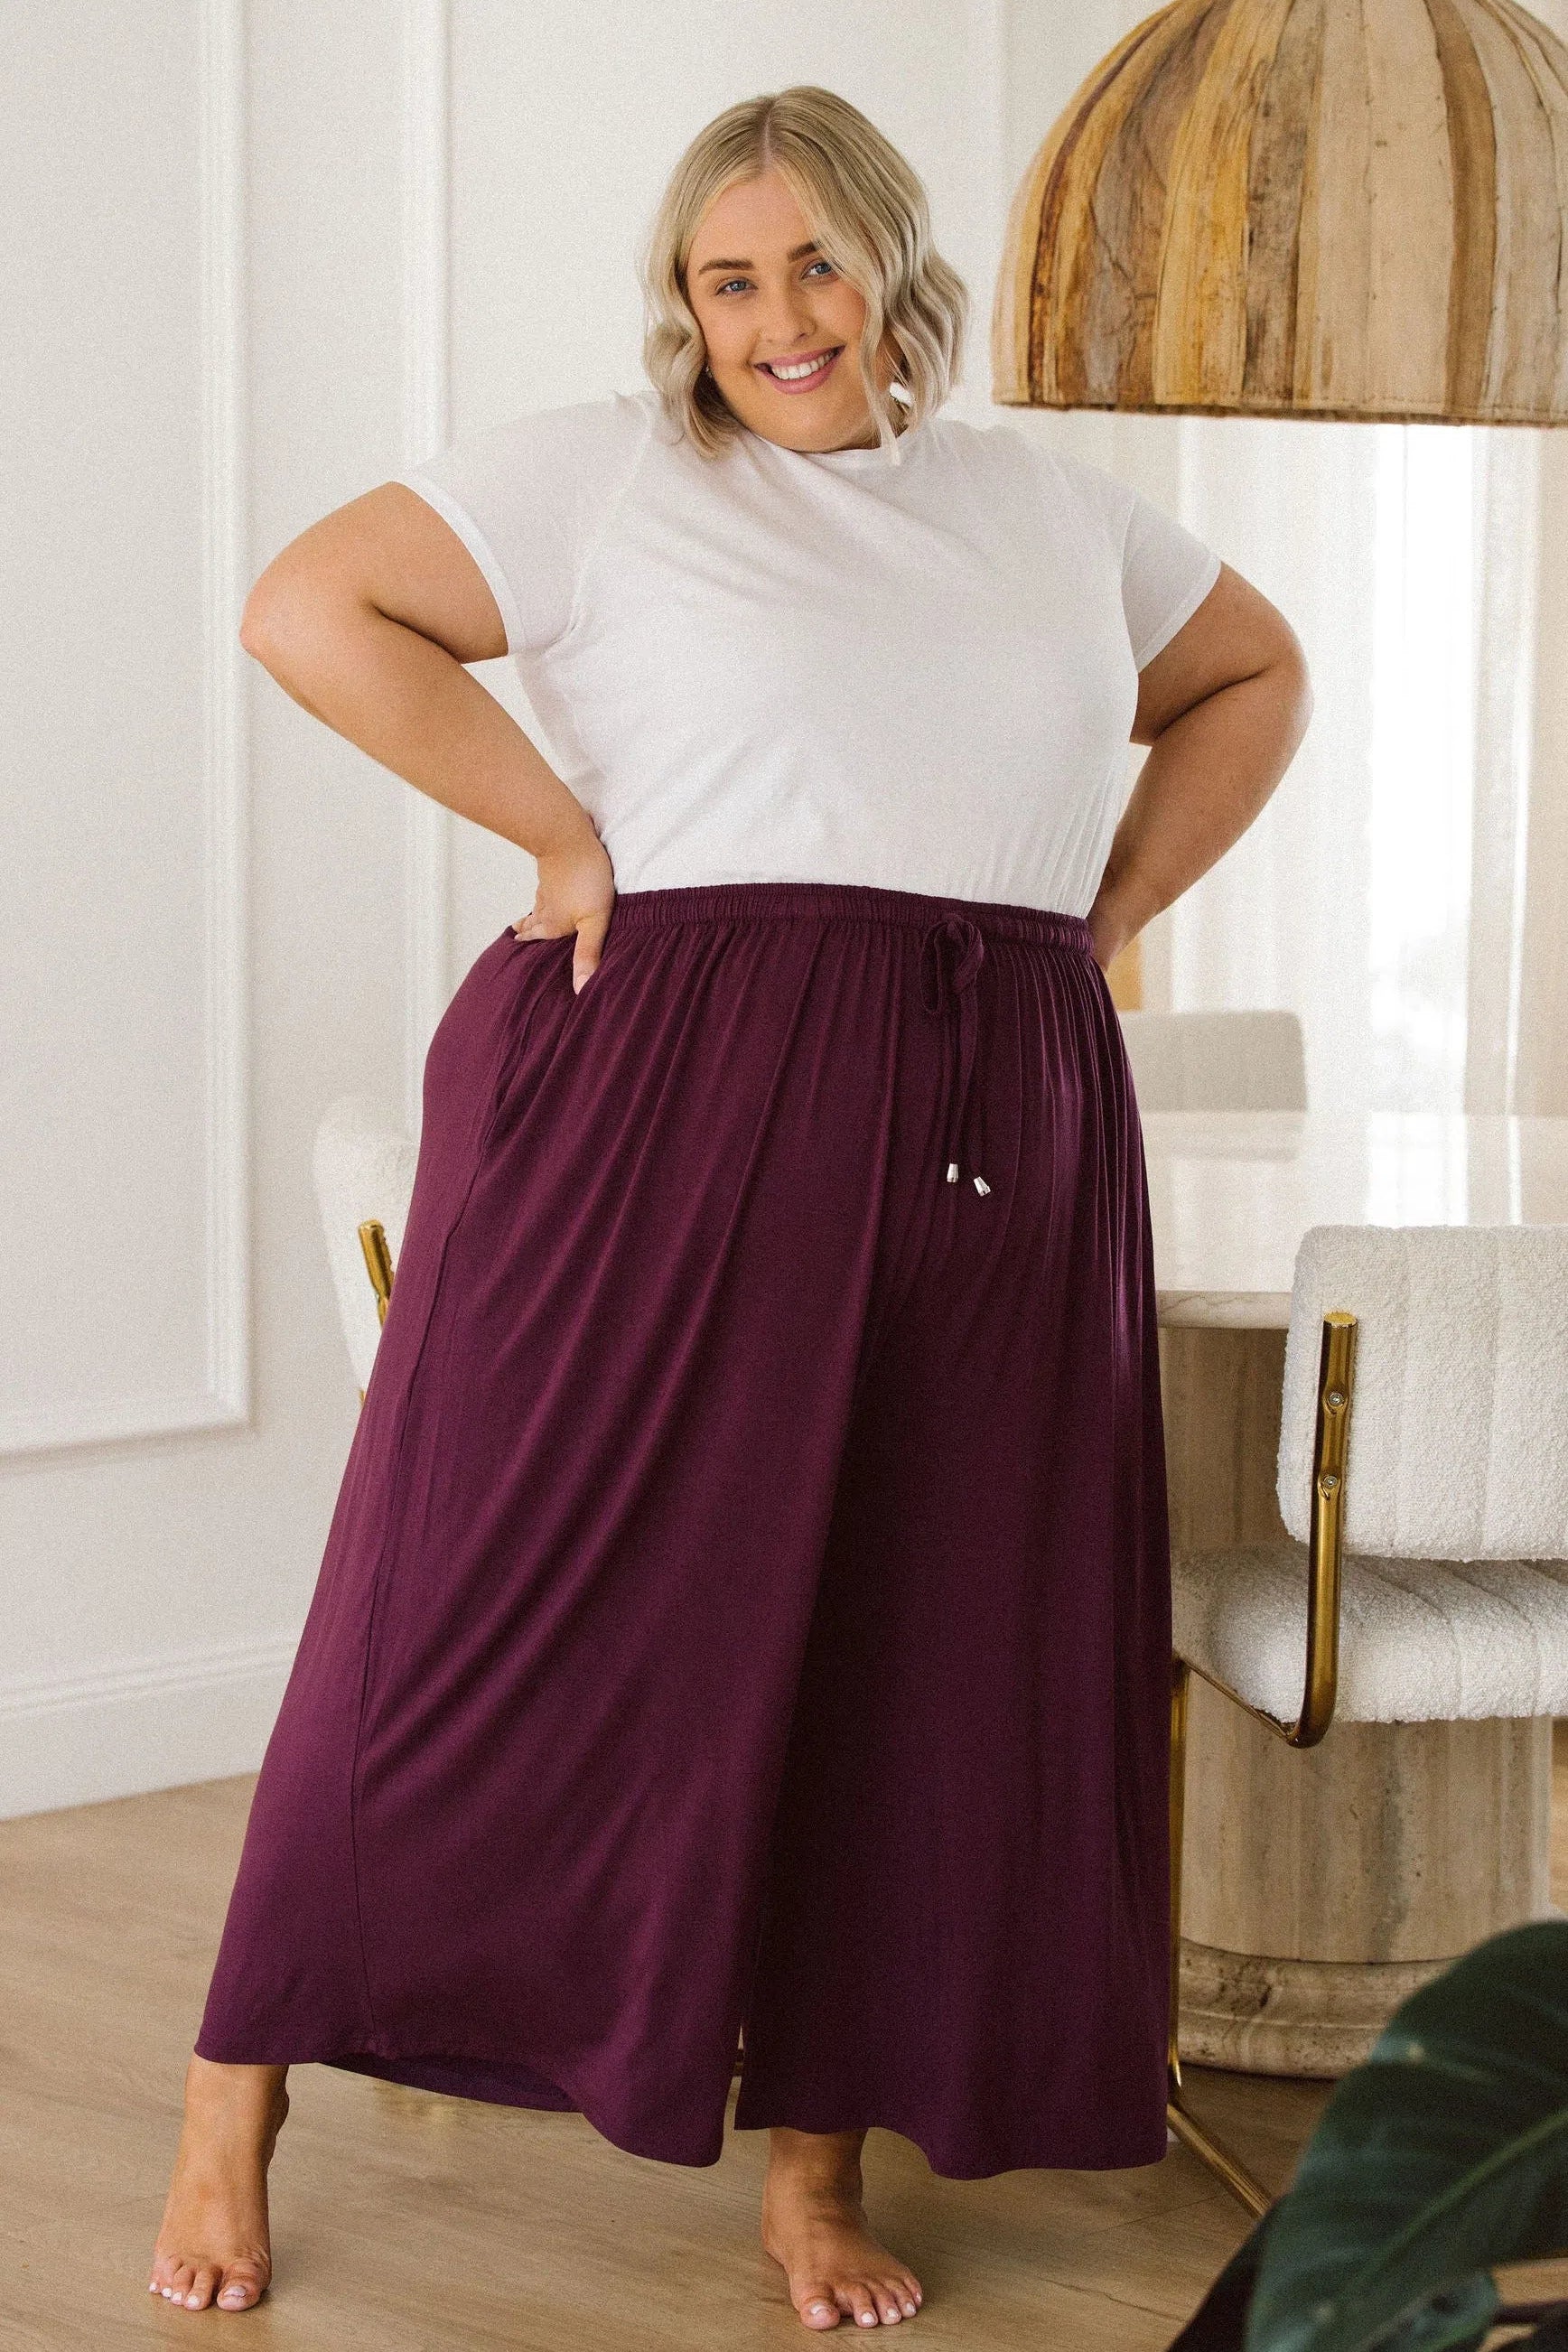 Peach The Label Designer Plus Size Pants - Darcy Pants in Berry for Curvy Women